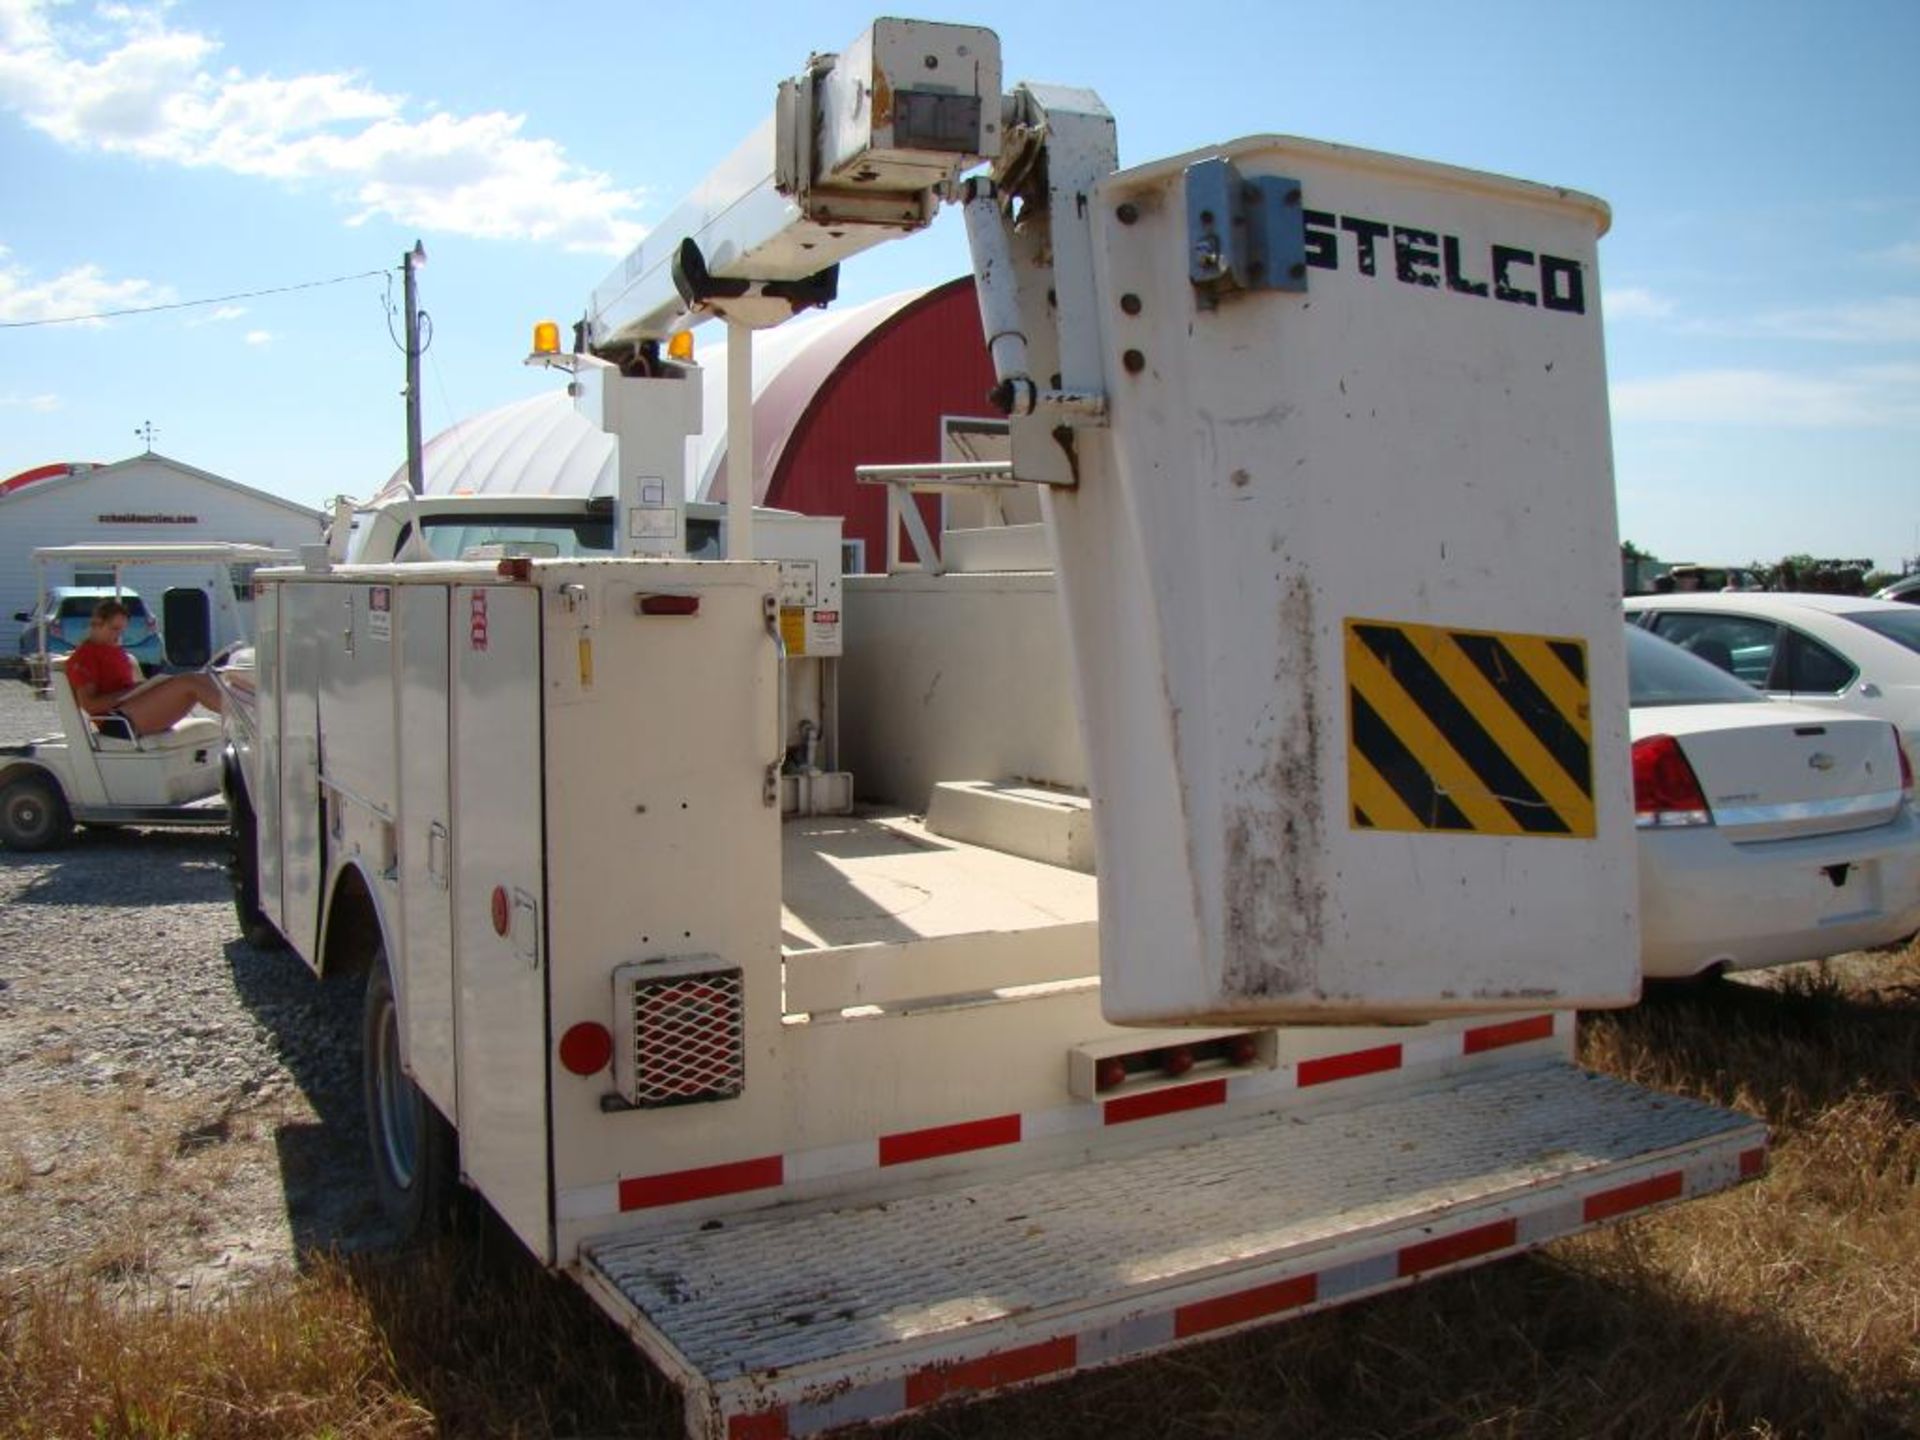 (Title) 1989 Ford F350 bucket truck, 7.3L diesel,4 speed with overdrive, Stelco bucket lift mofel - Image 11 of 18